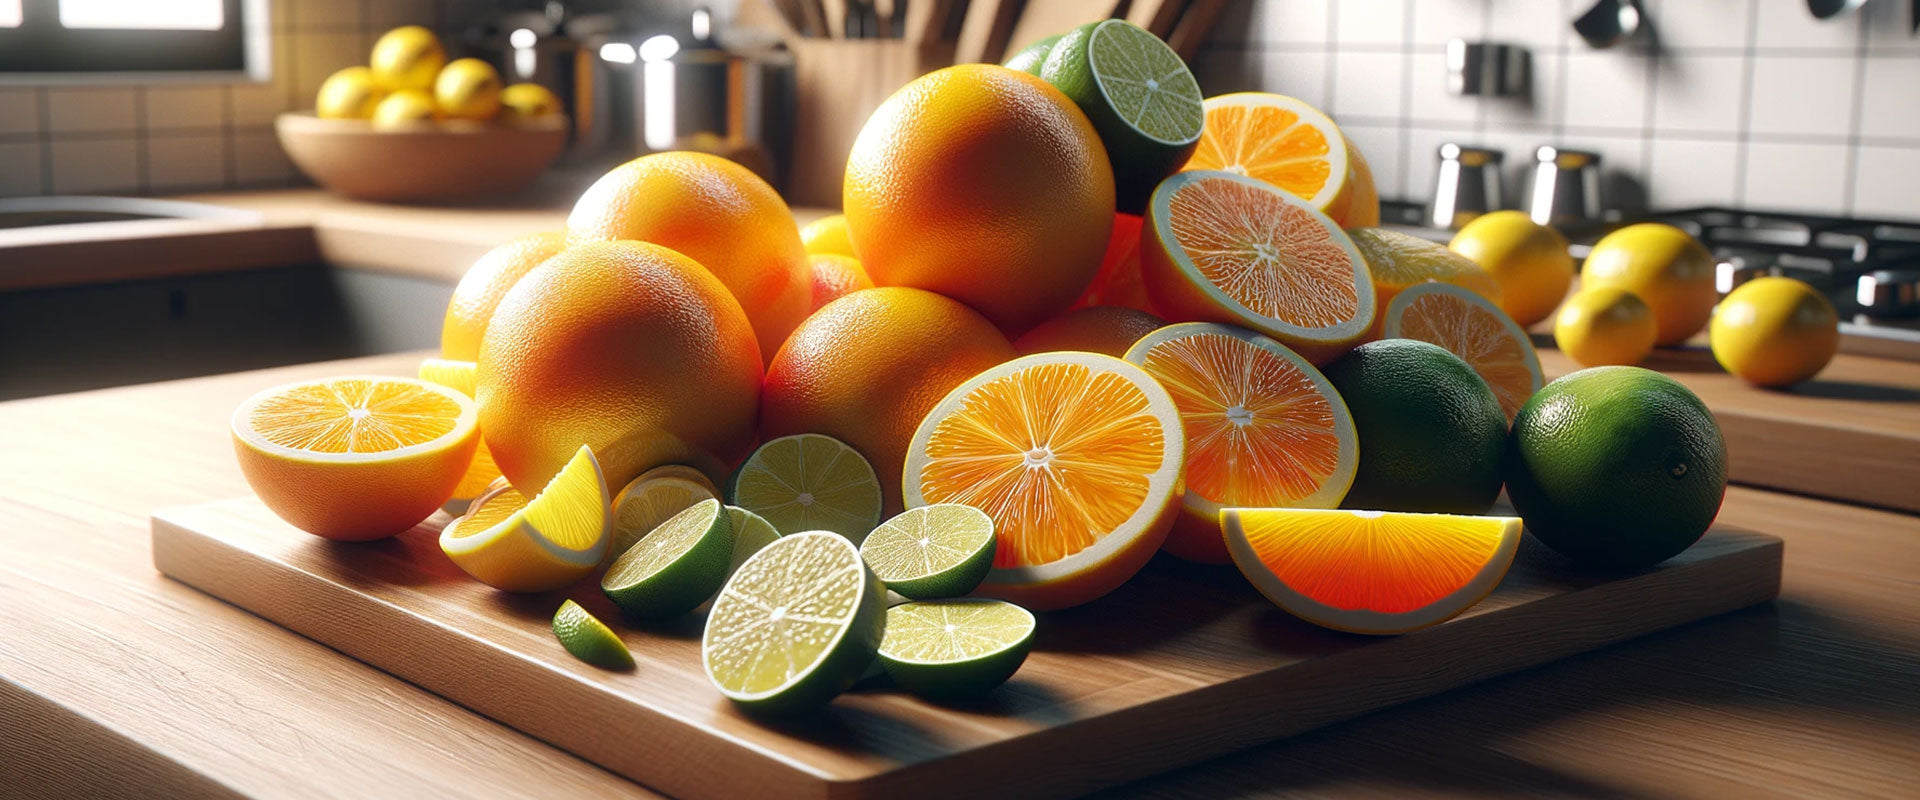 lemons, limes, oranges on a cutting board in a kitchen